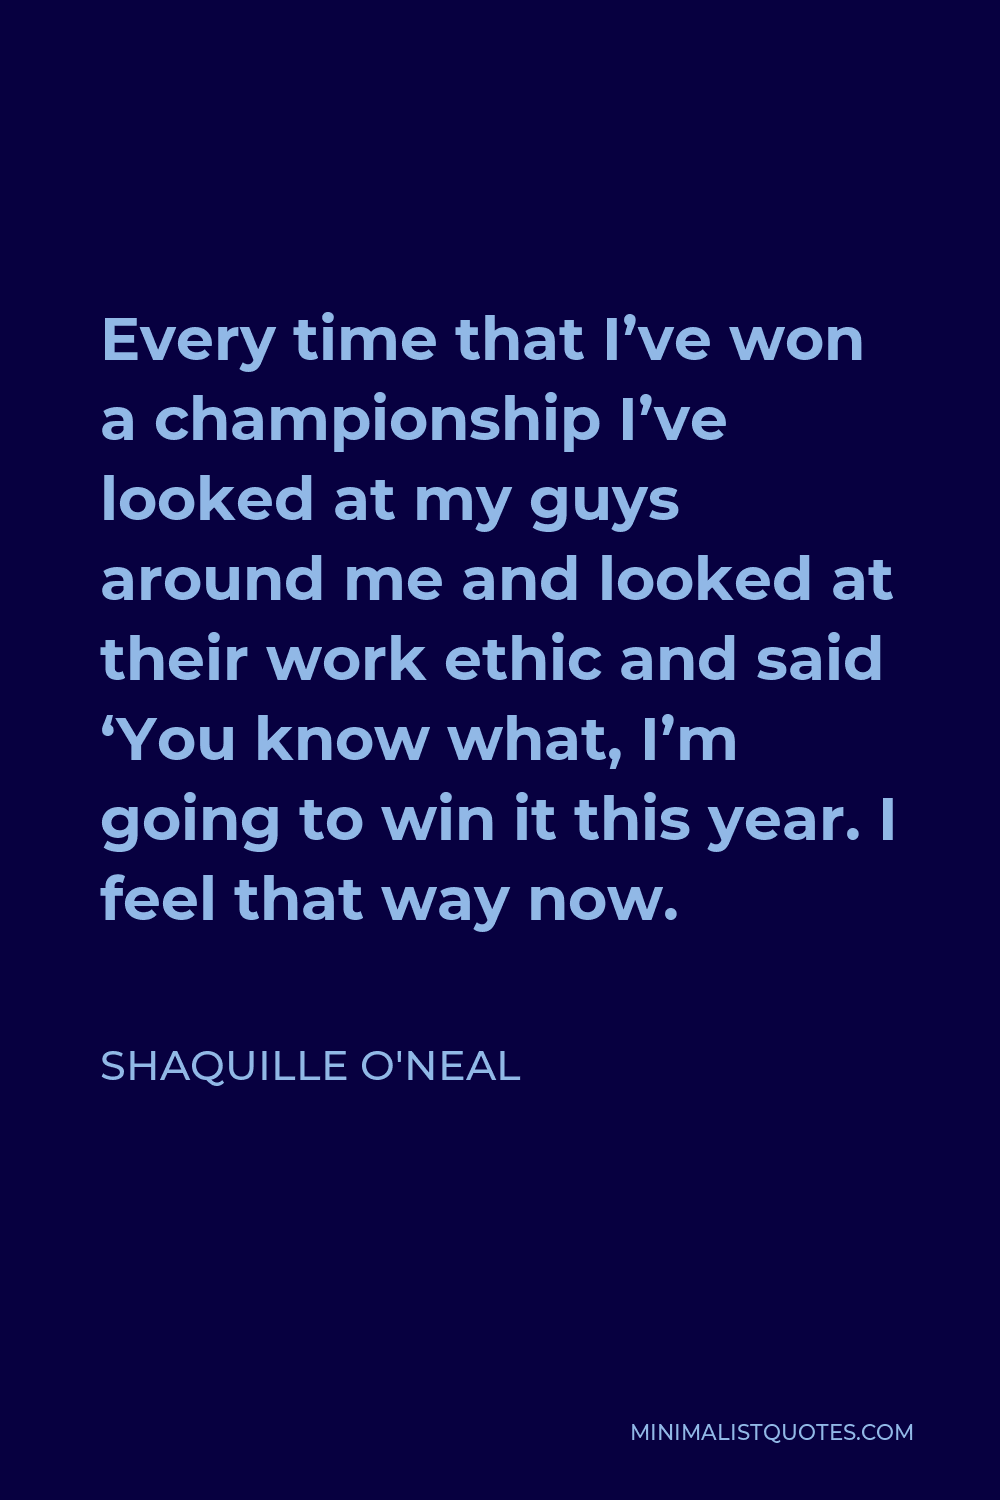 Shaquille O'Neal Quote - Every time that I’ve won a championship I’ve looked at my guys around me and looked at their work ethic and said ‘You know what, I’m going to win it this year. I feel that way now.